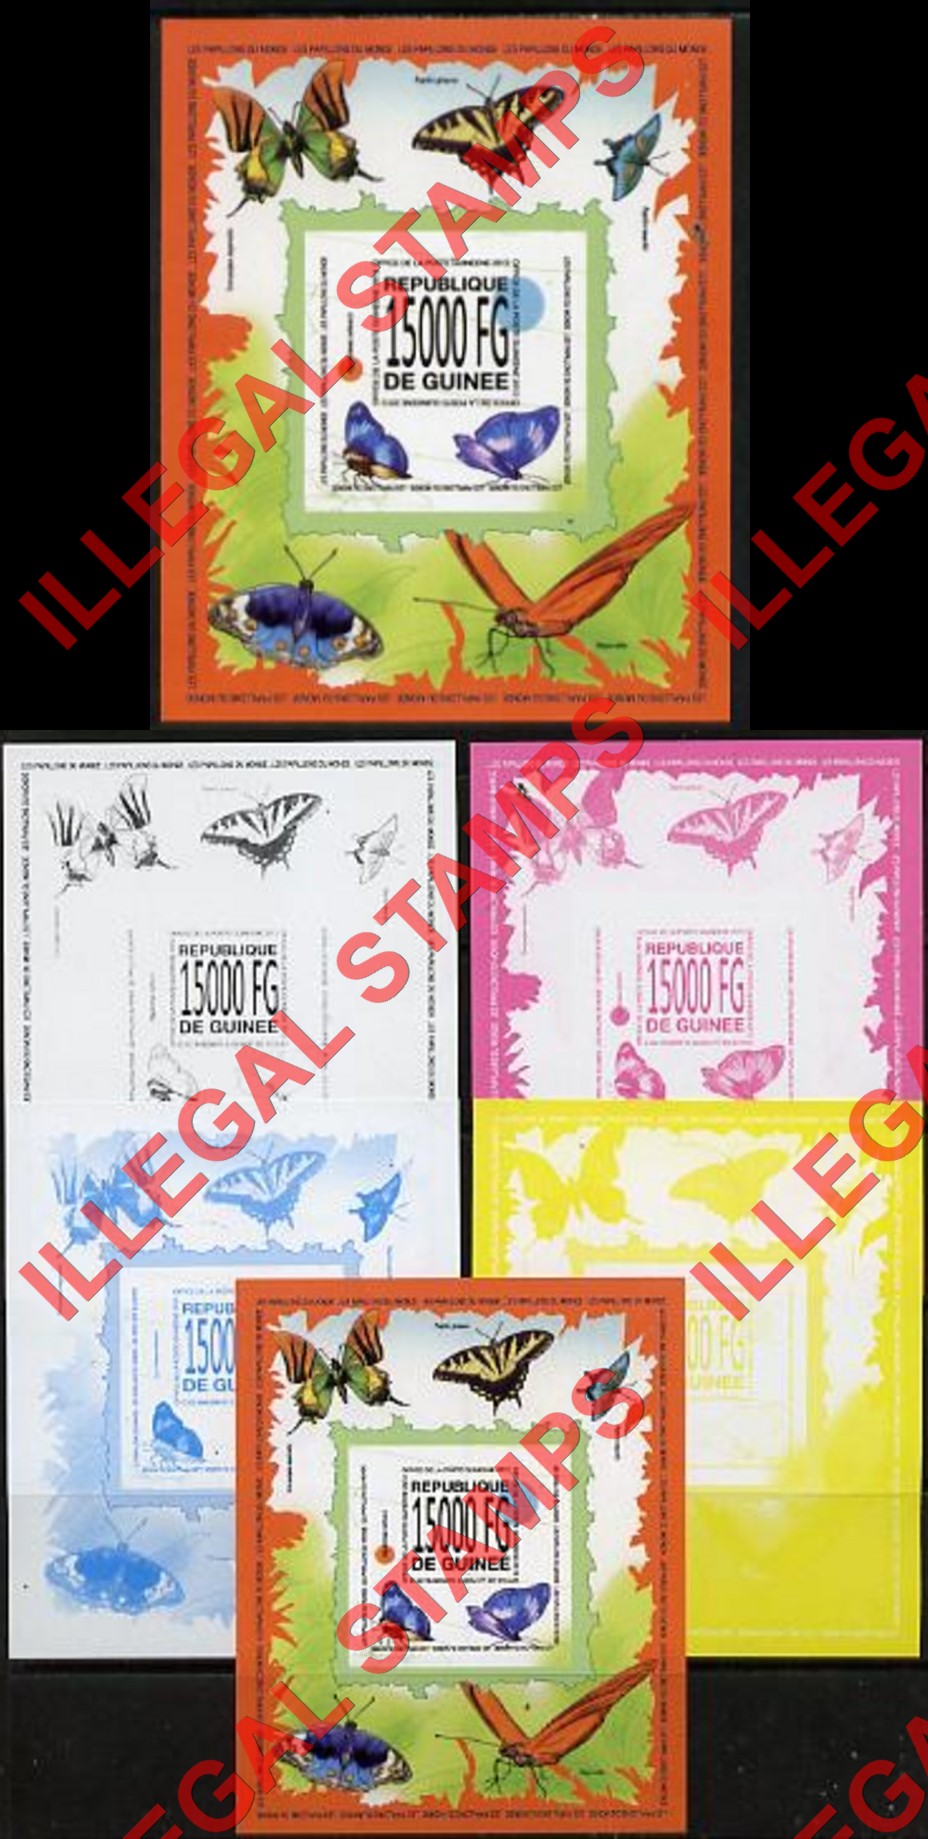 Guinea Republic 2013 Butterflies Counterfeit Illegal Stamp with Matching Color Proofs (Set 1)